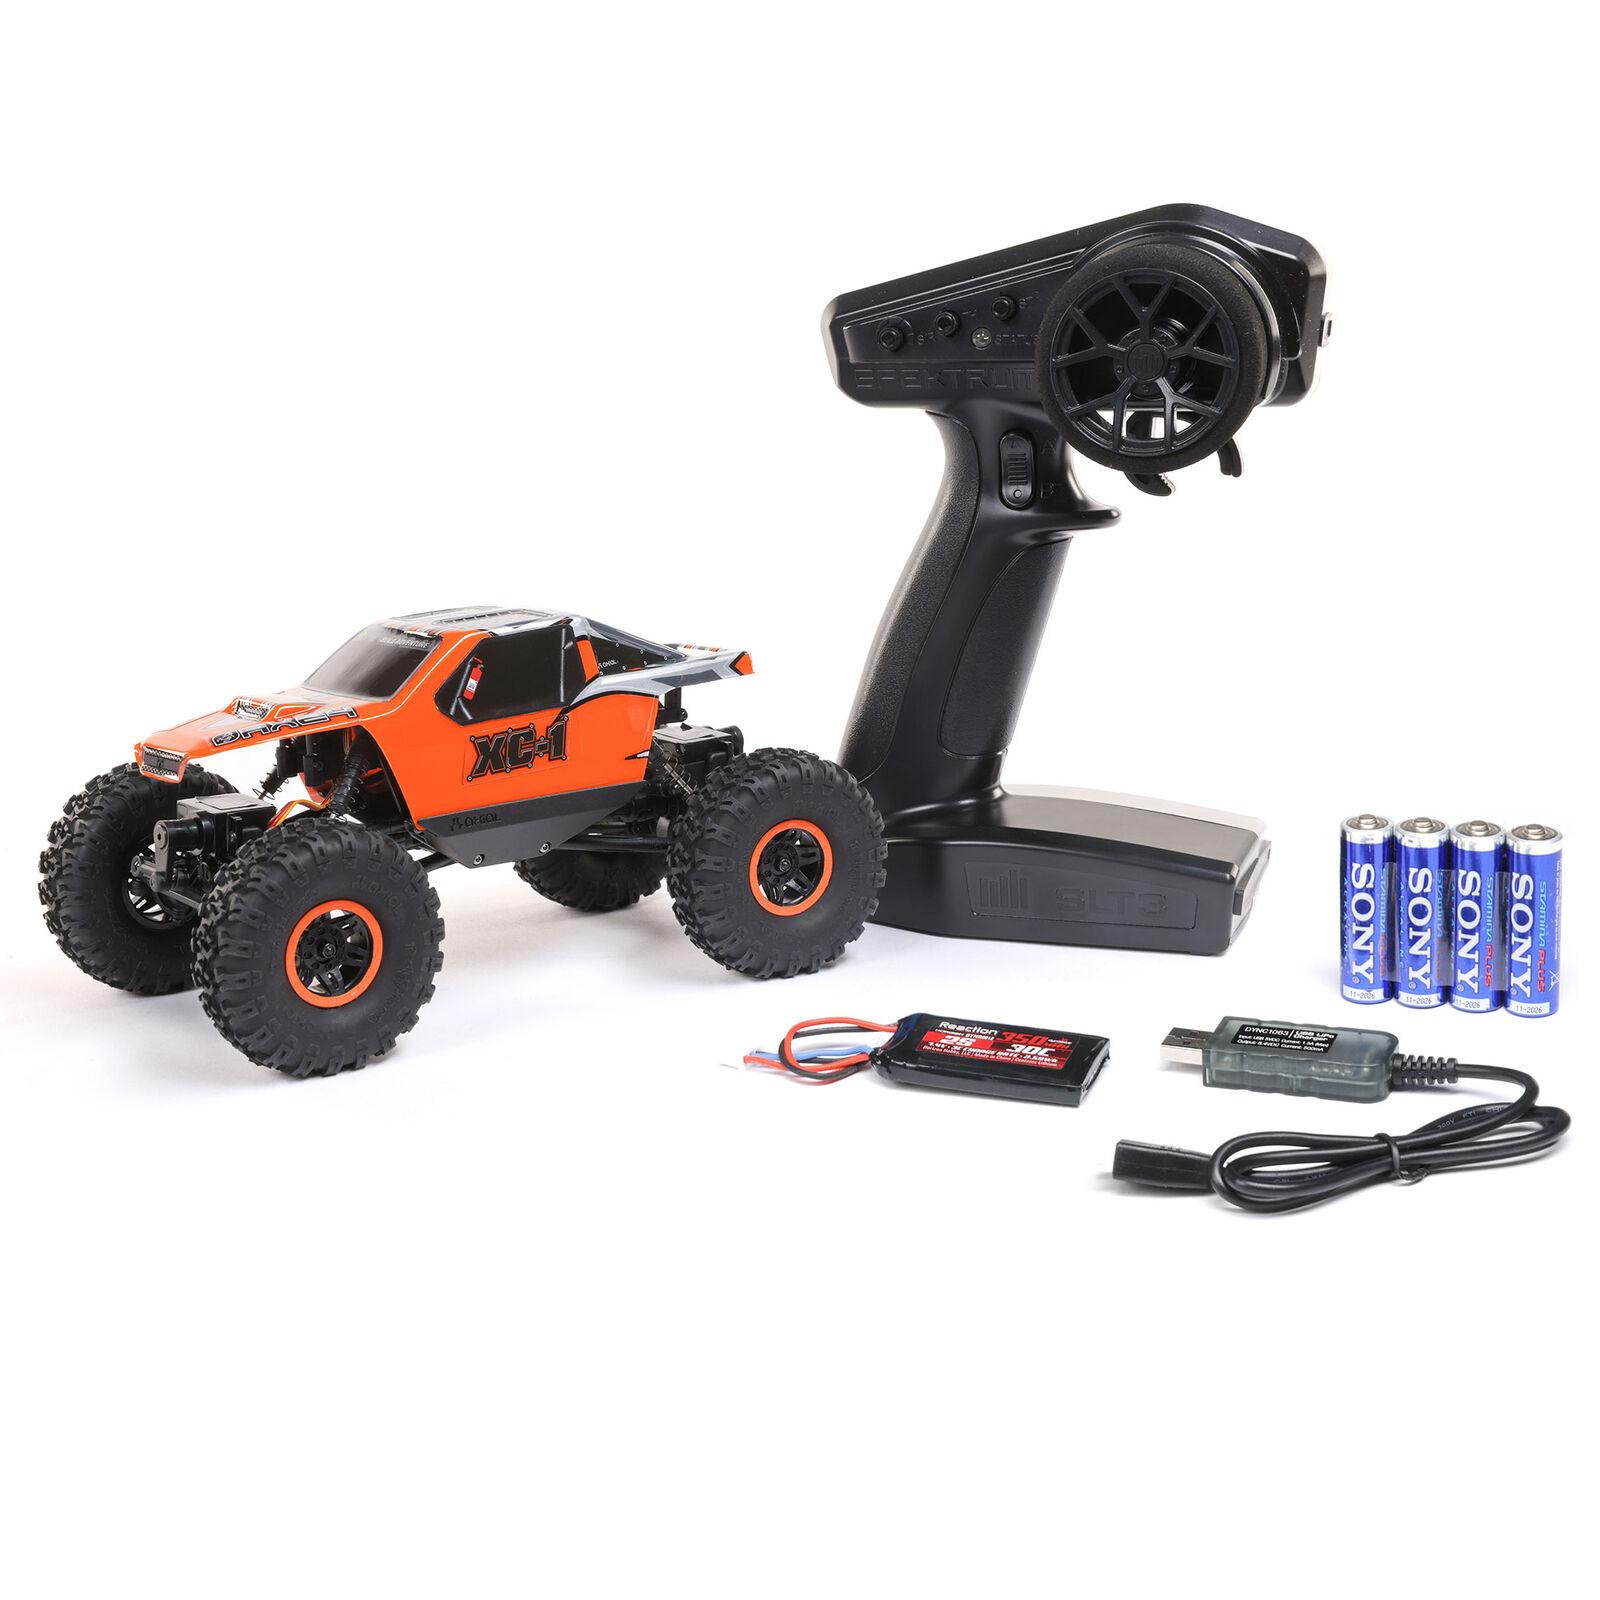 Best Rc Brand: Top RC Brands For Your Next Purchase